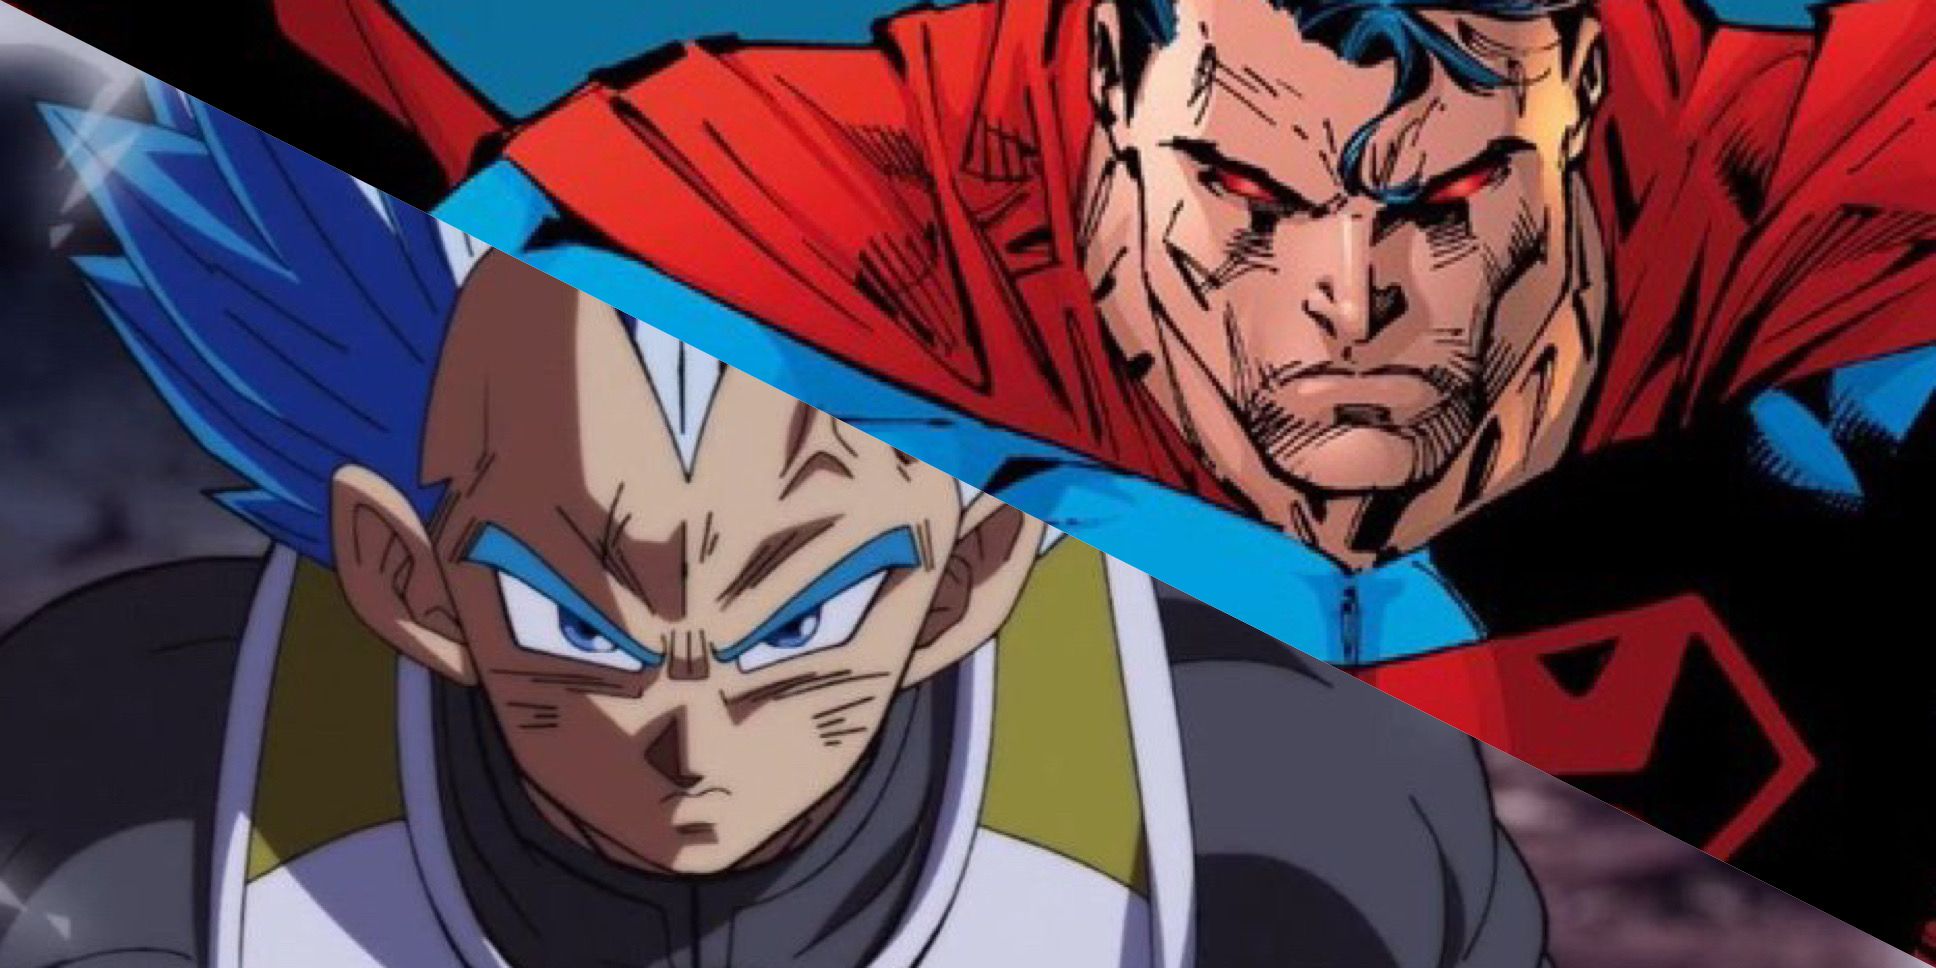 Vegeta from Dragon Ball and Superman looking ready to fight